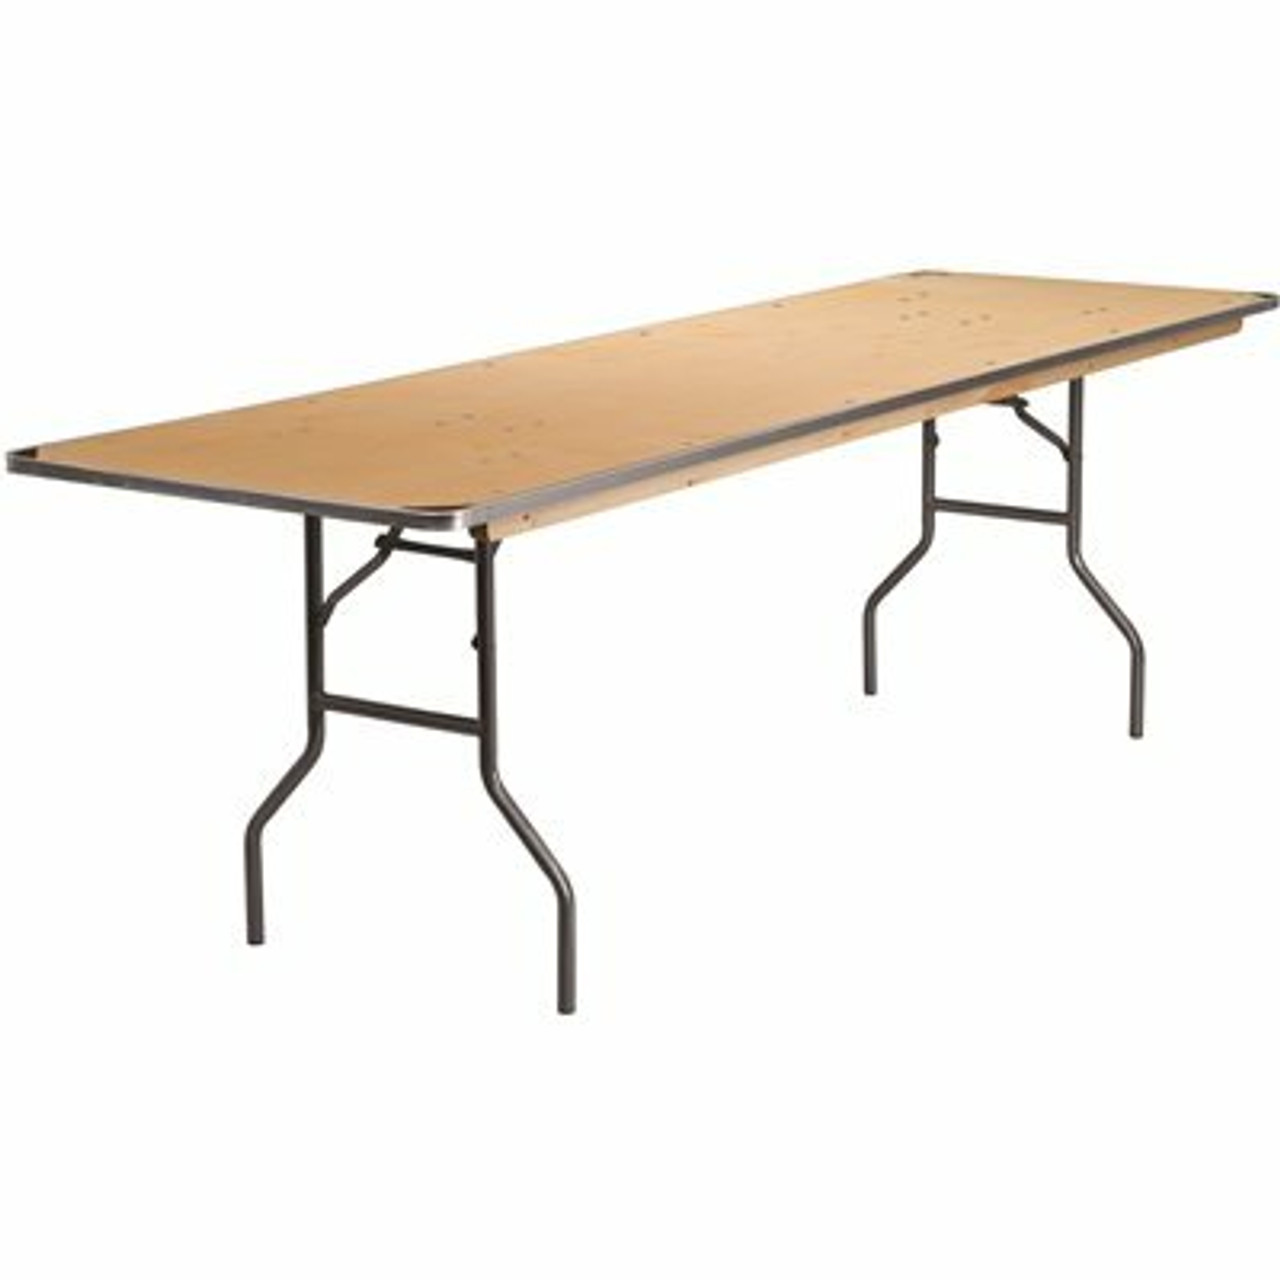 96 In. Natural Wood Tabletop Metal Frame Folding Table - 308688145